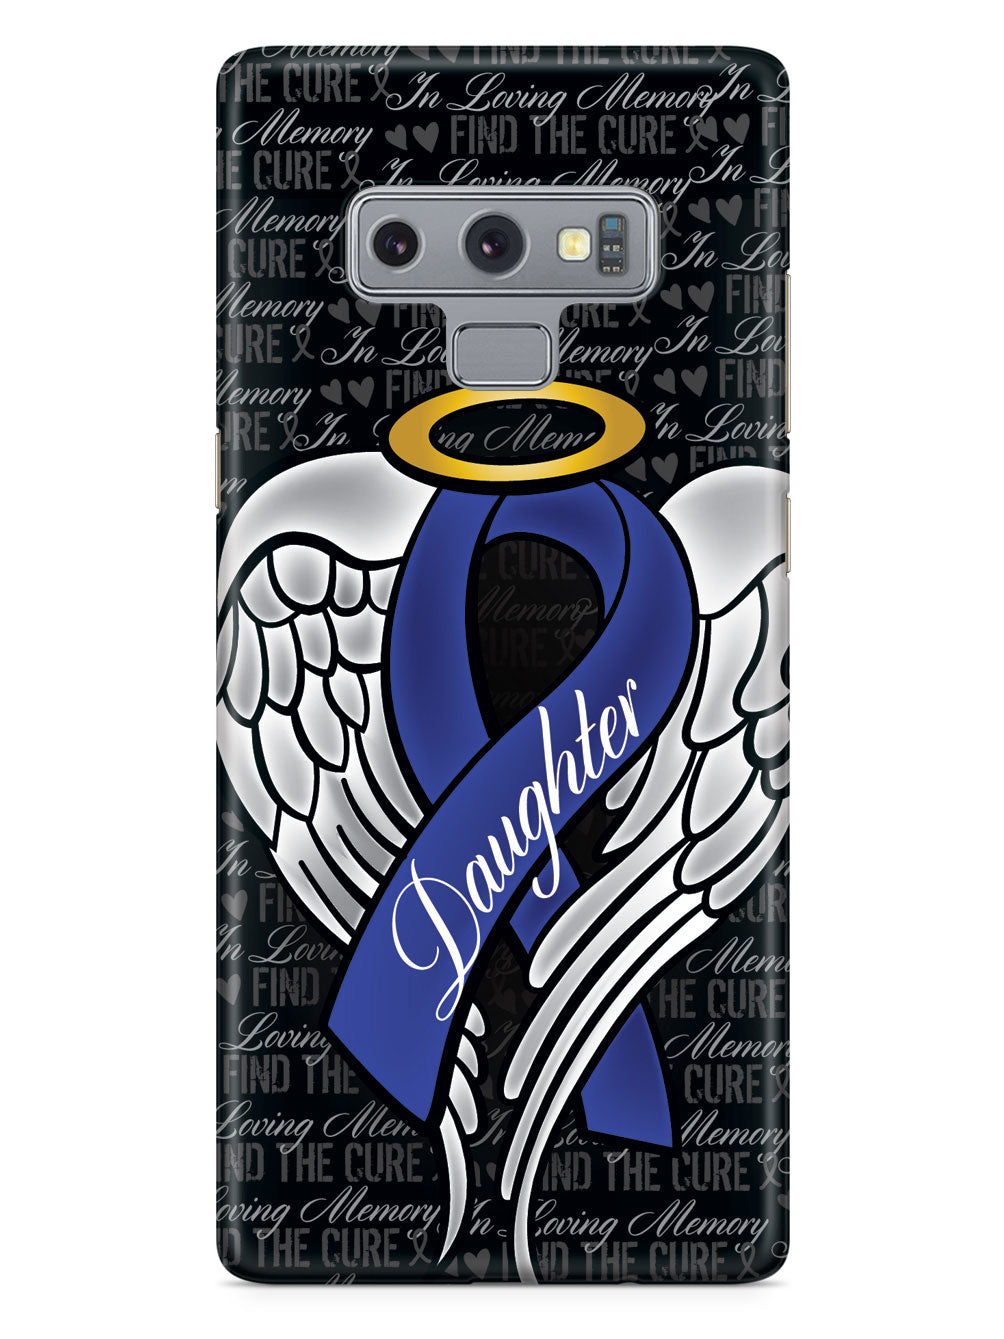 In Loving Memory of My Daughter - Blue Ribbon Case